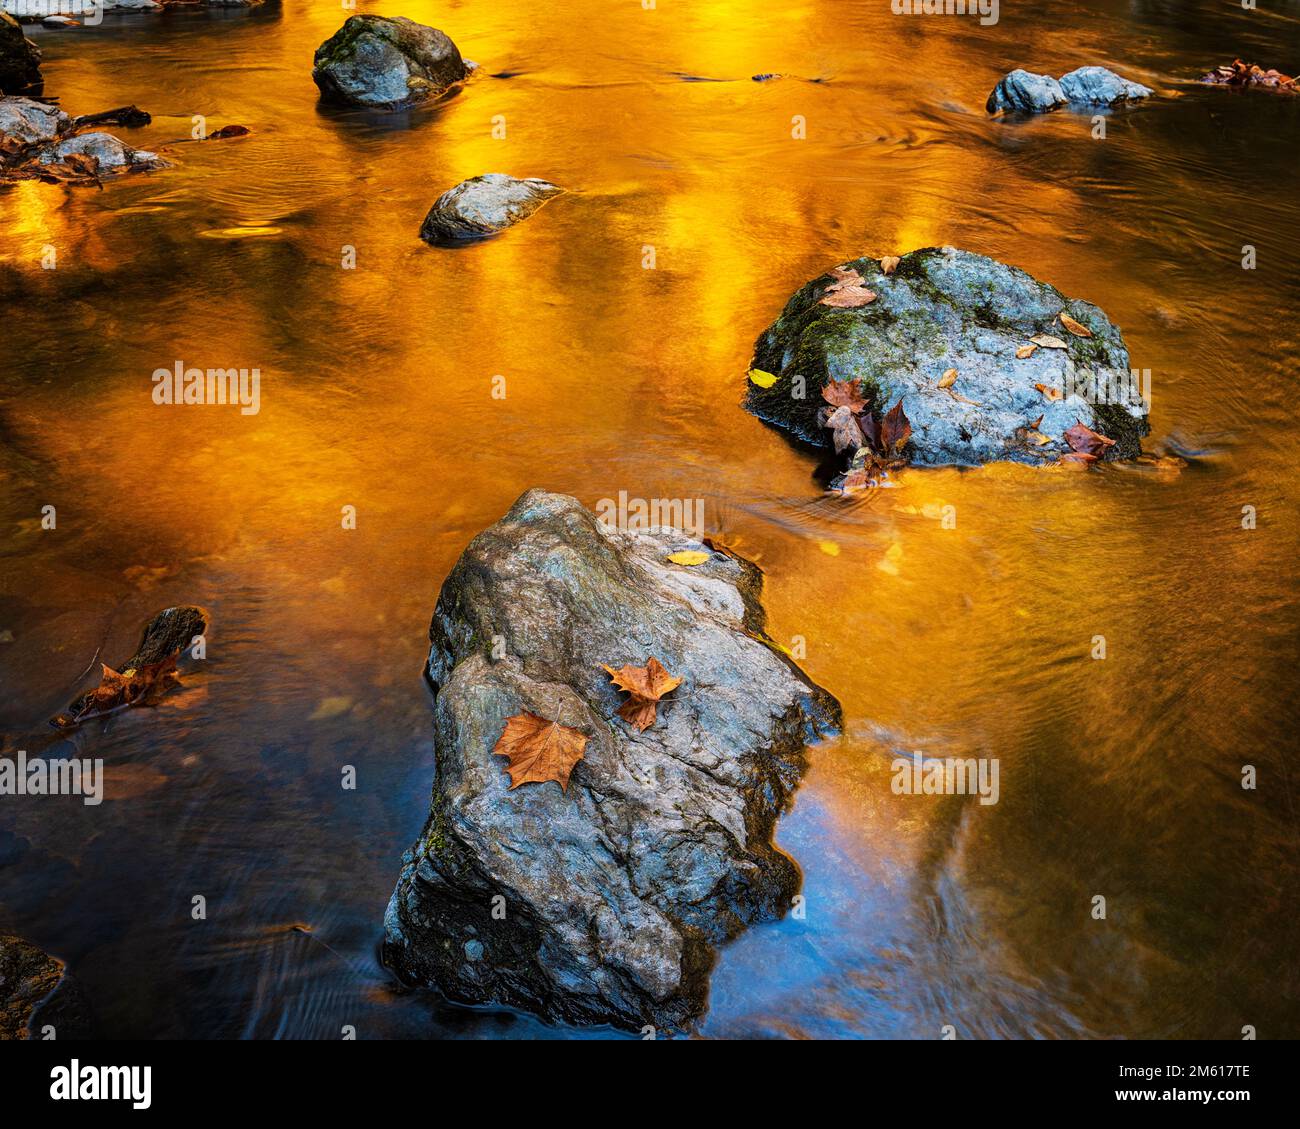 Autumn color reflected in the Little Pigeon River in Great Smoky Mountains National Park near Townsend, Tennessee Stock Photo